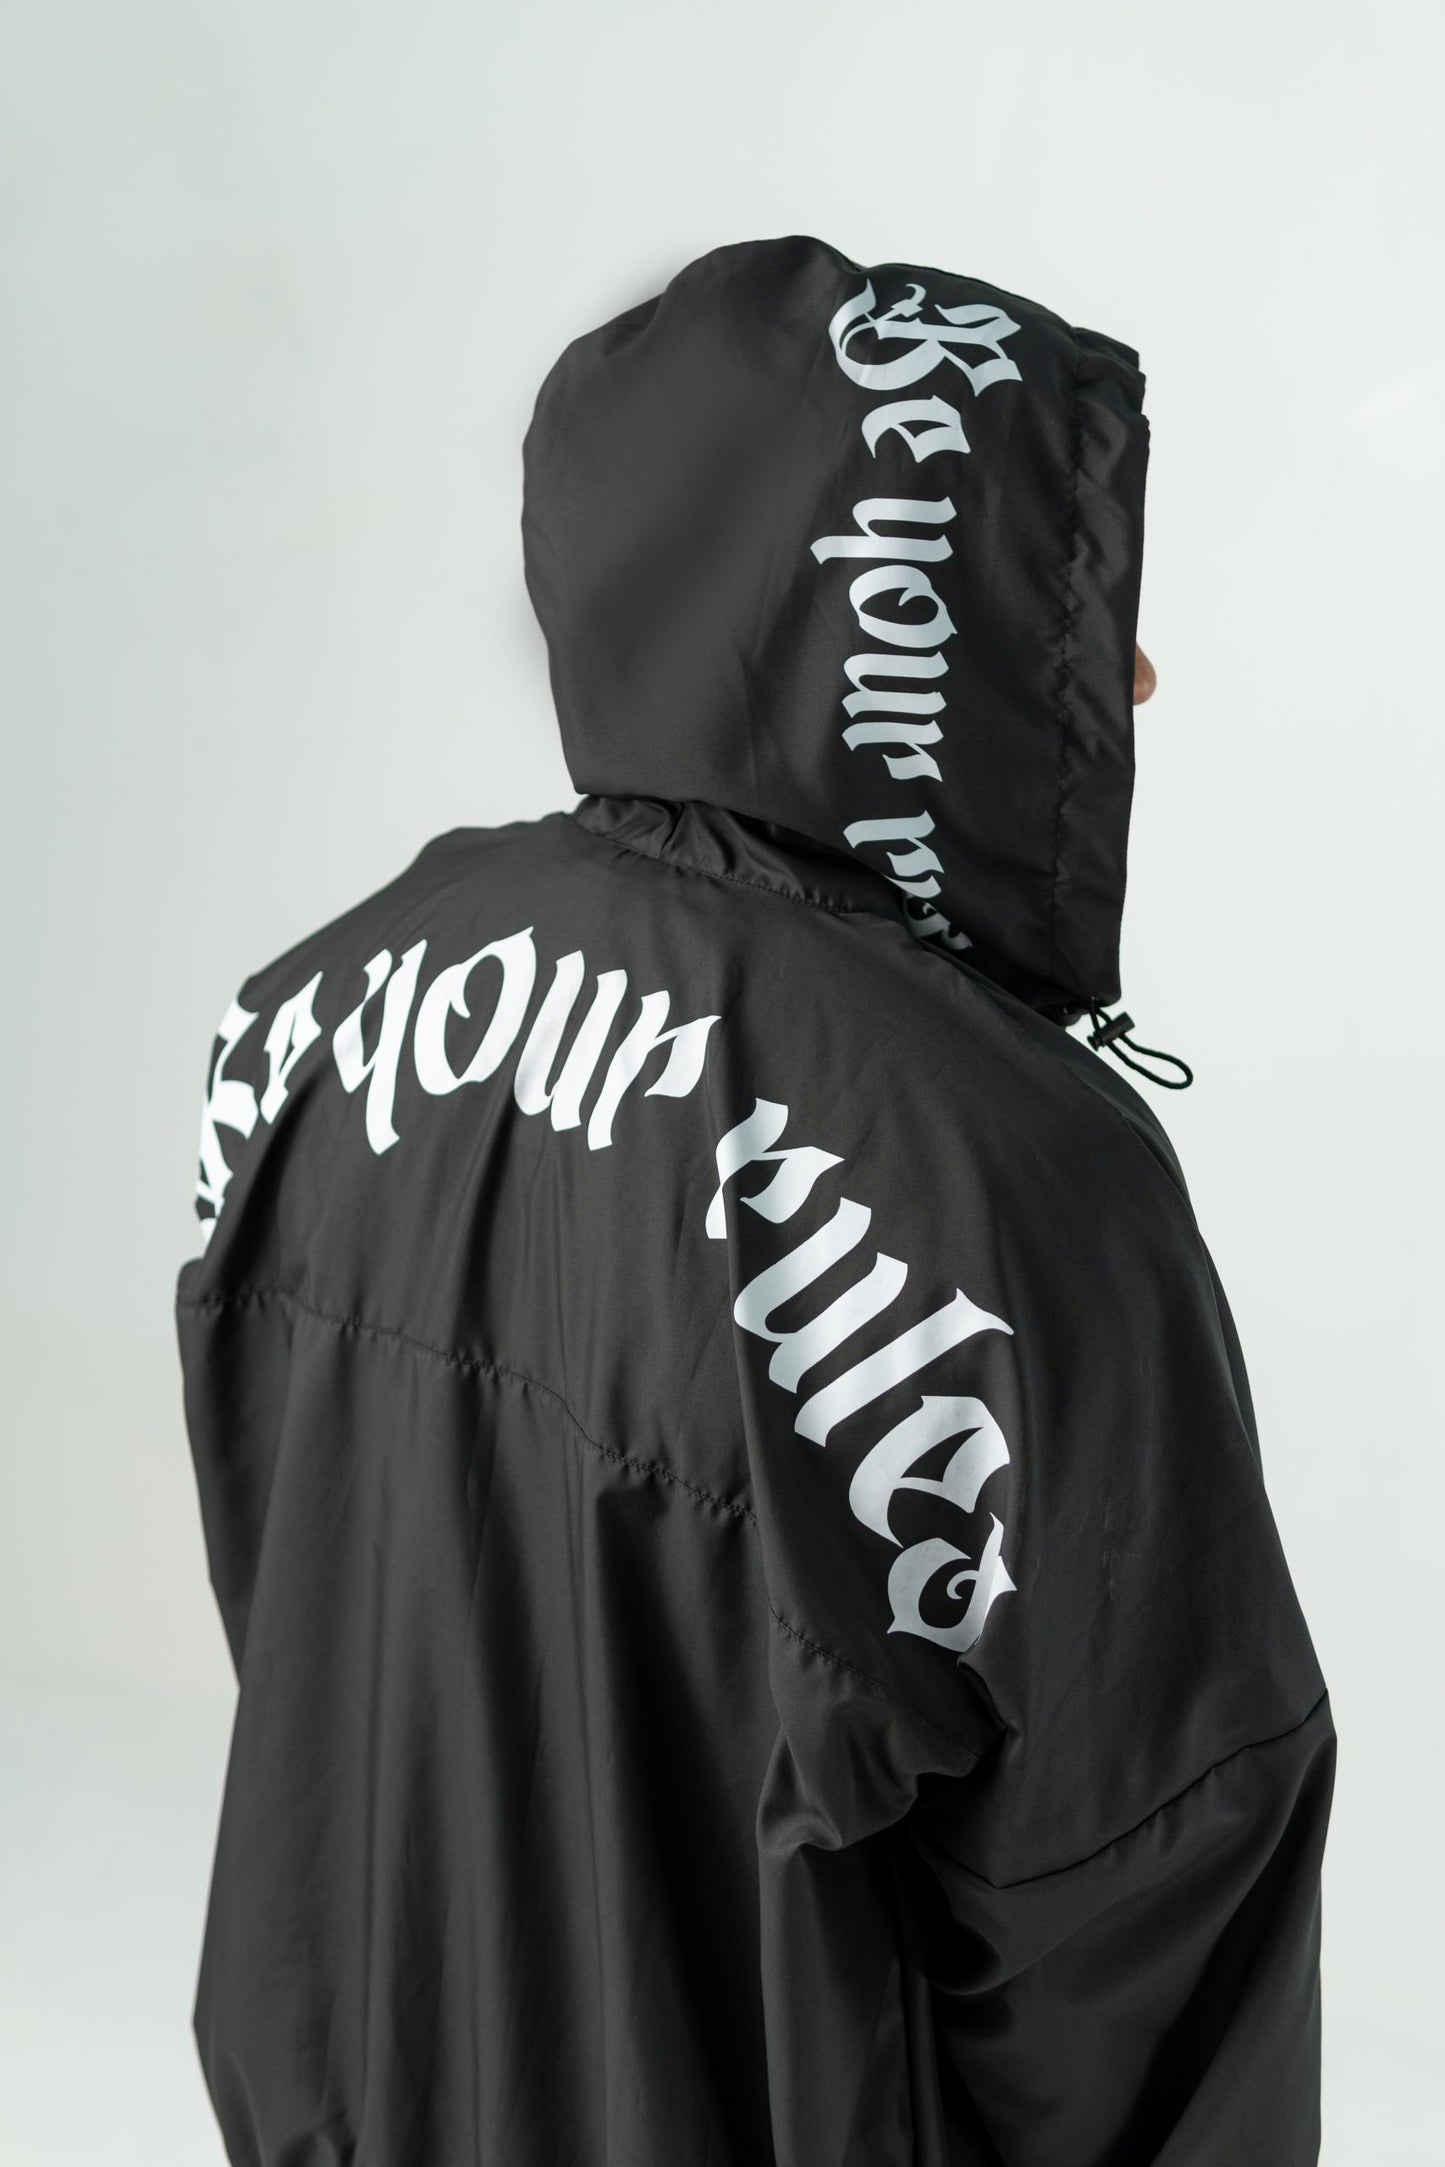 CHAQUETA IMPERMEABLE UNISEX NEGRA 'BE YOUR RULES'